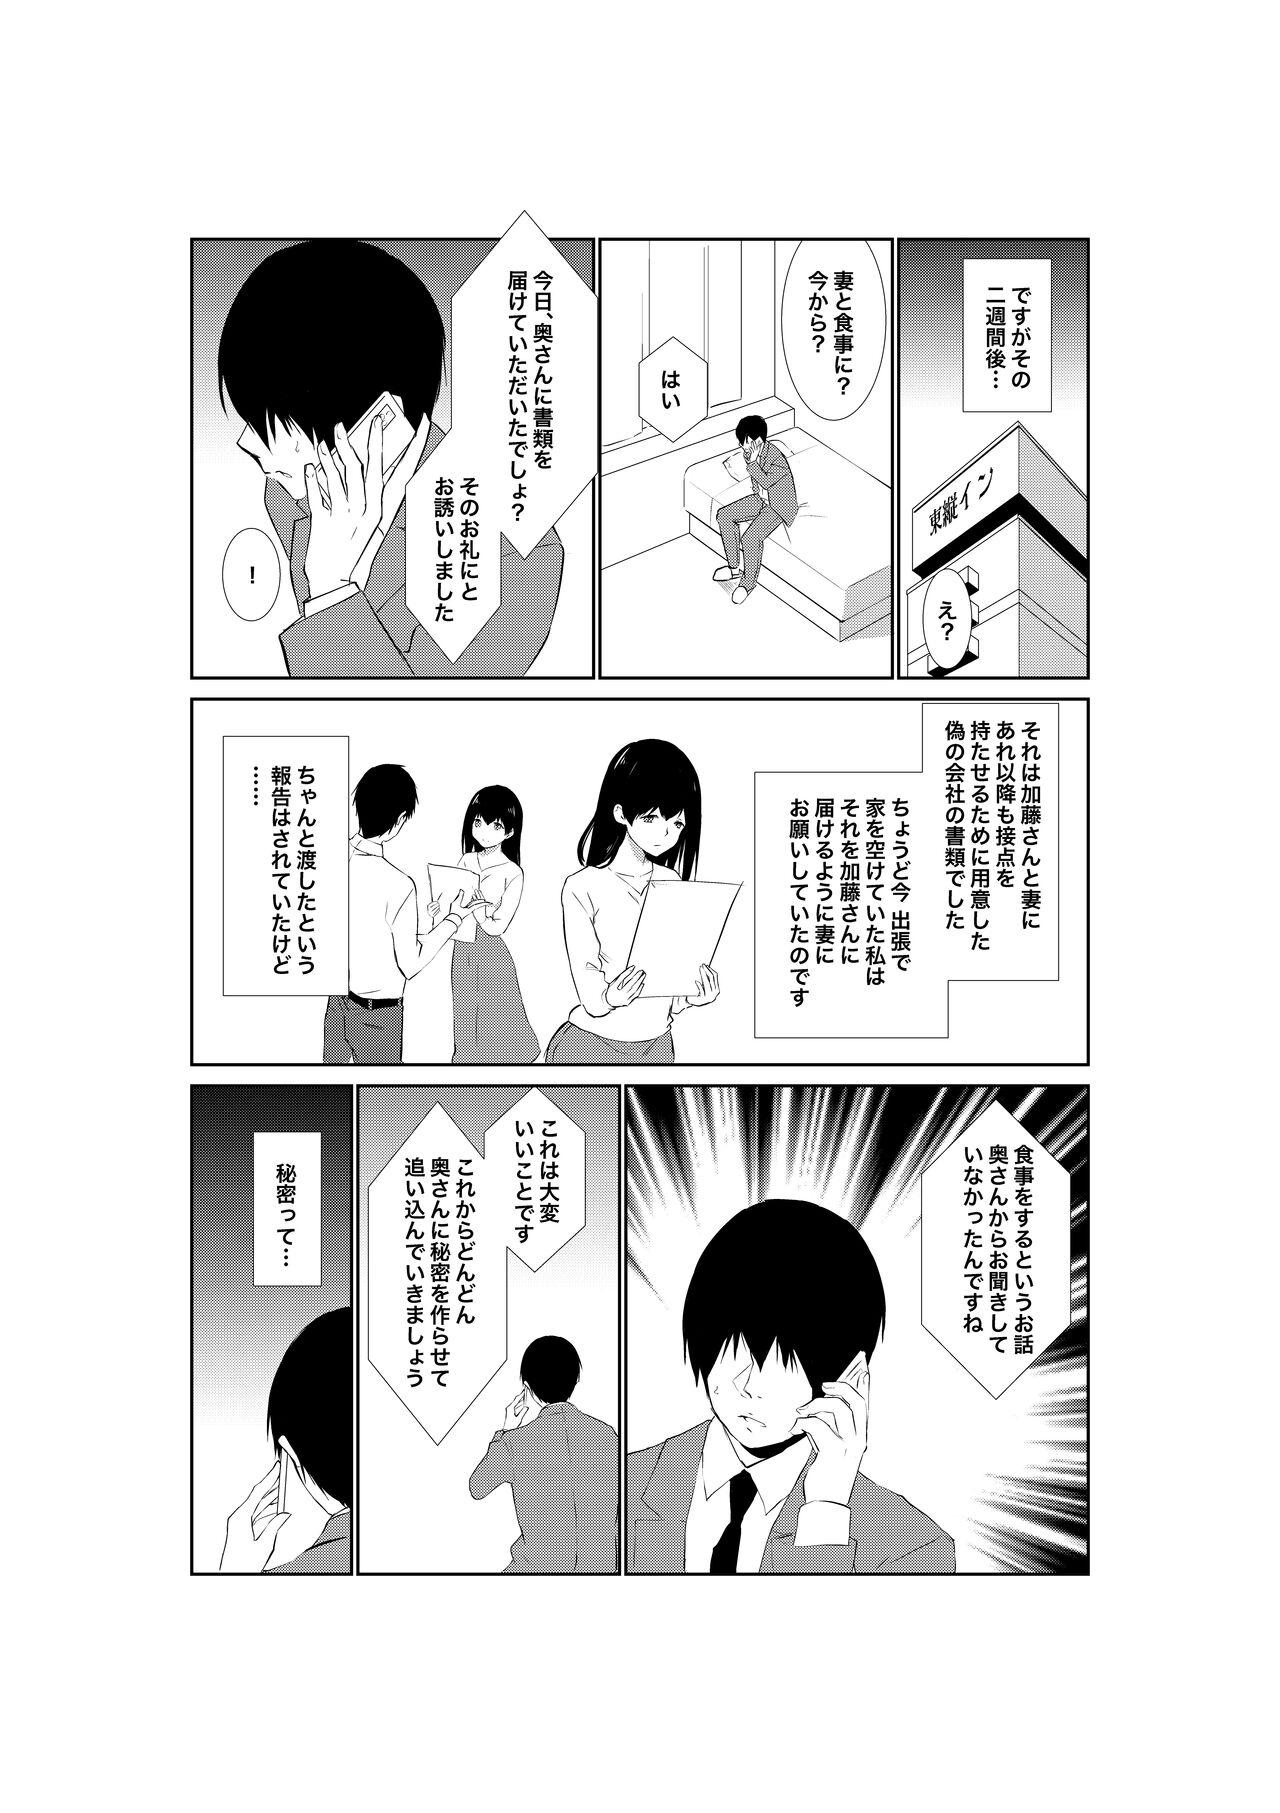 Married 妻が他人に堕ちるまで - Original Taboo - Page 9